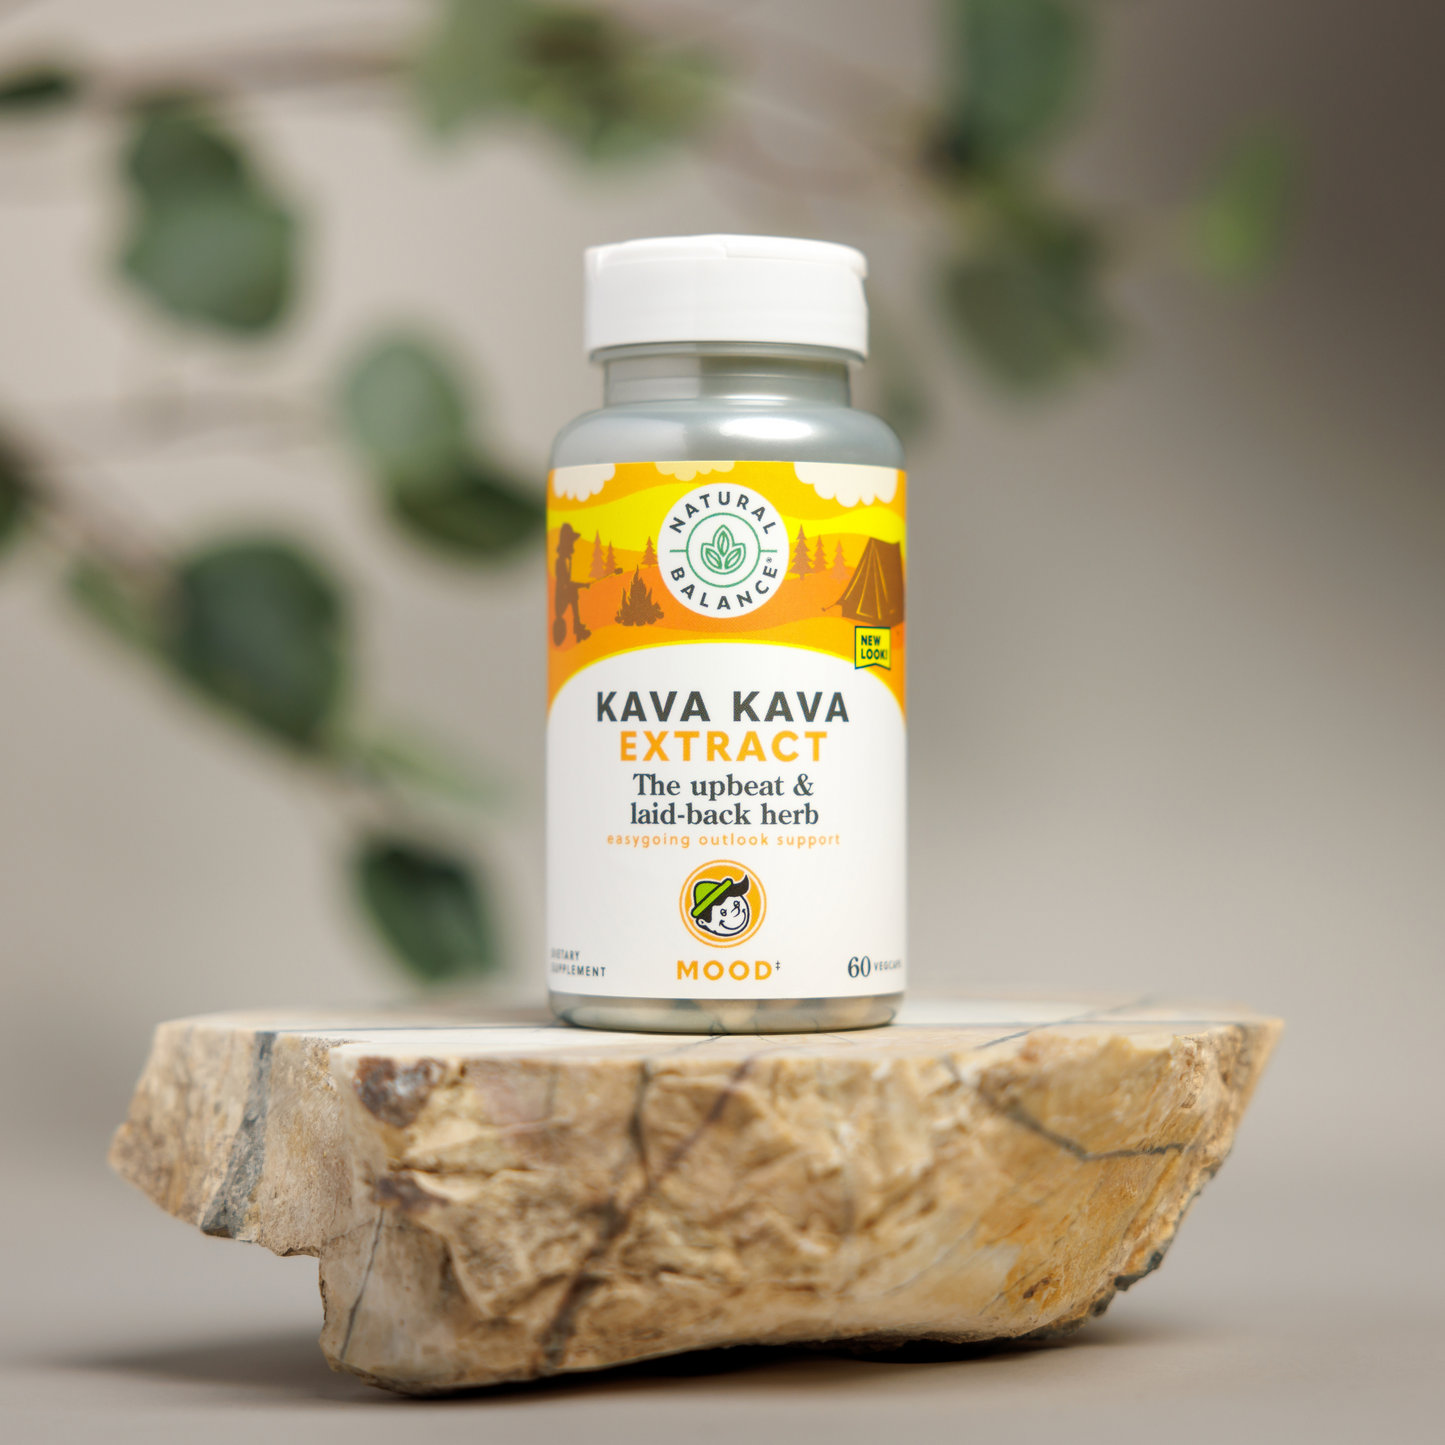 Kava Kava Root Extract | Easygoing Outlook Support